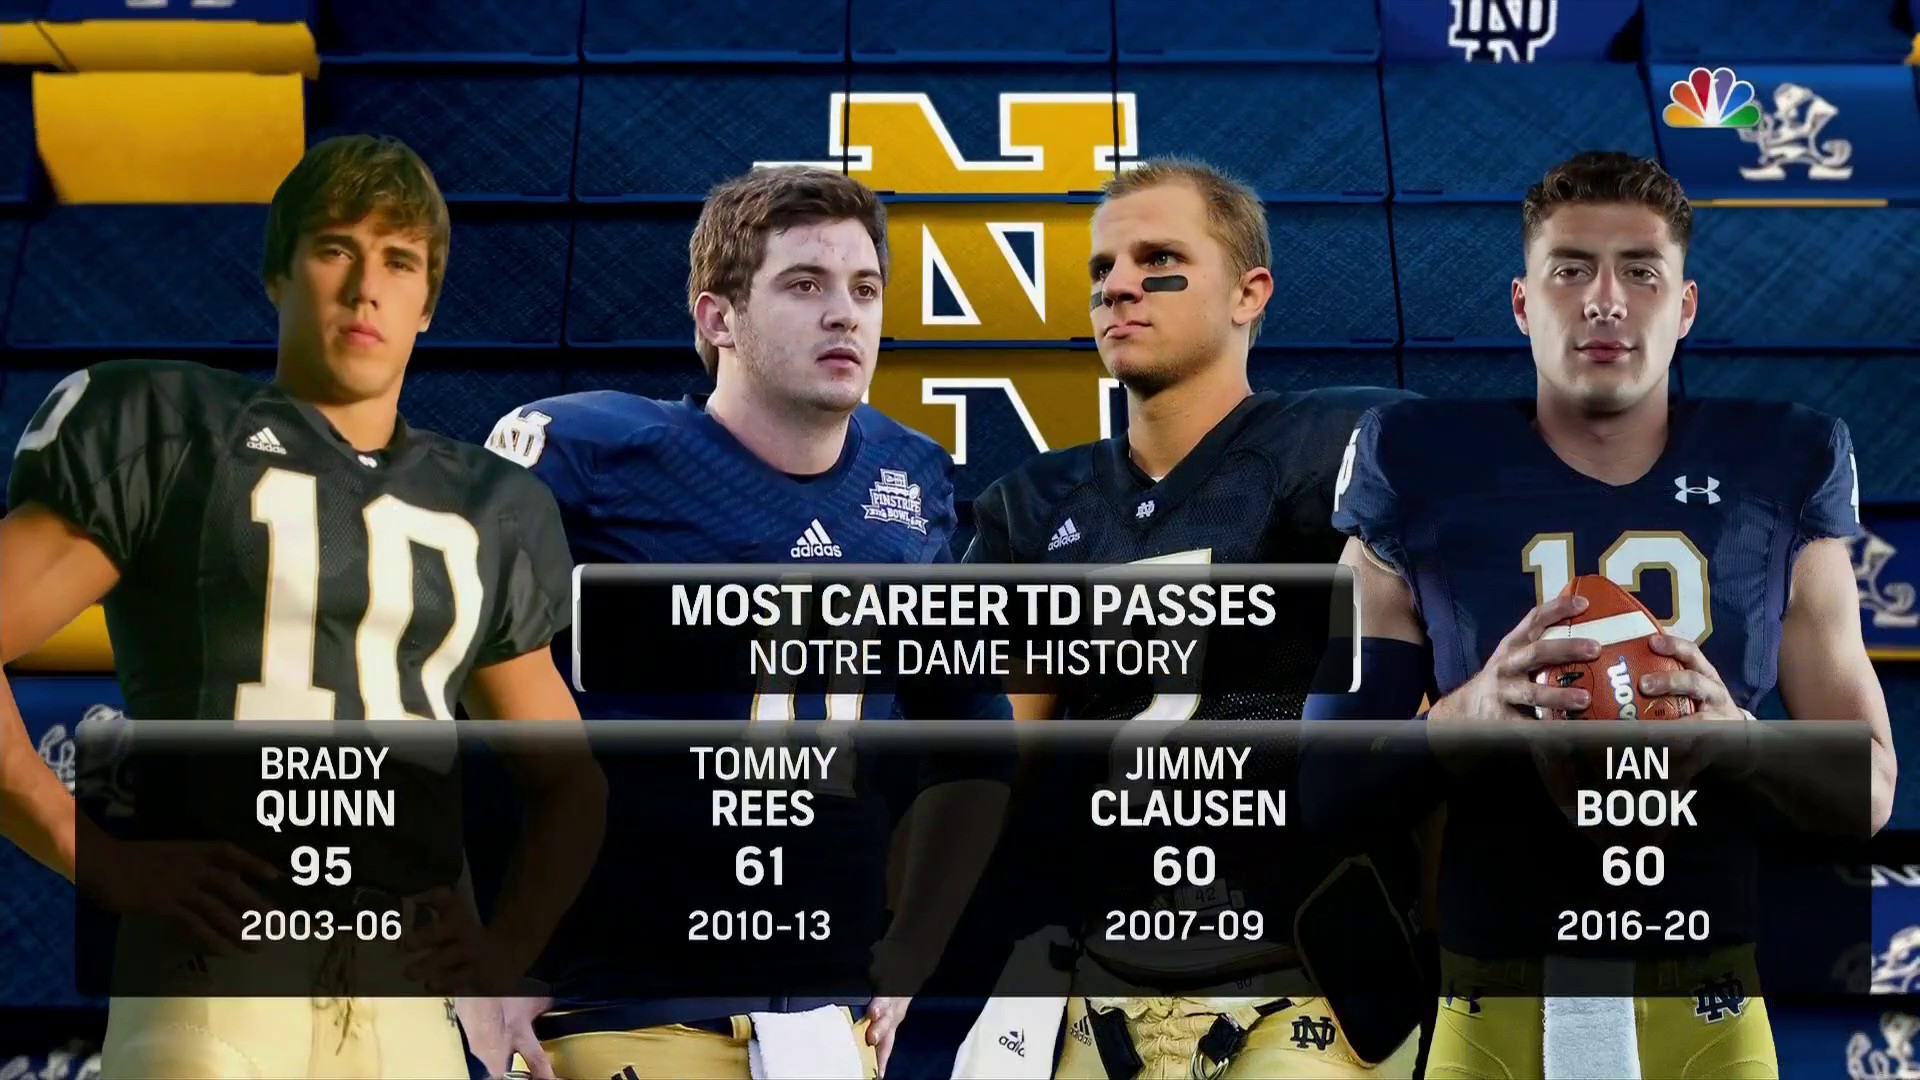 What's Wrong With Jimmy Clausen?